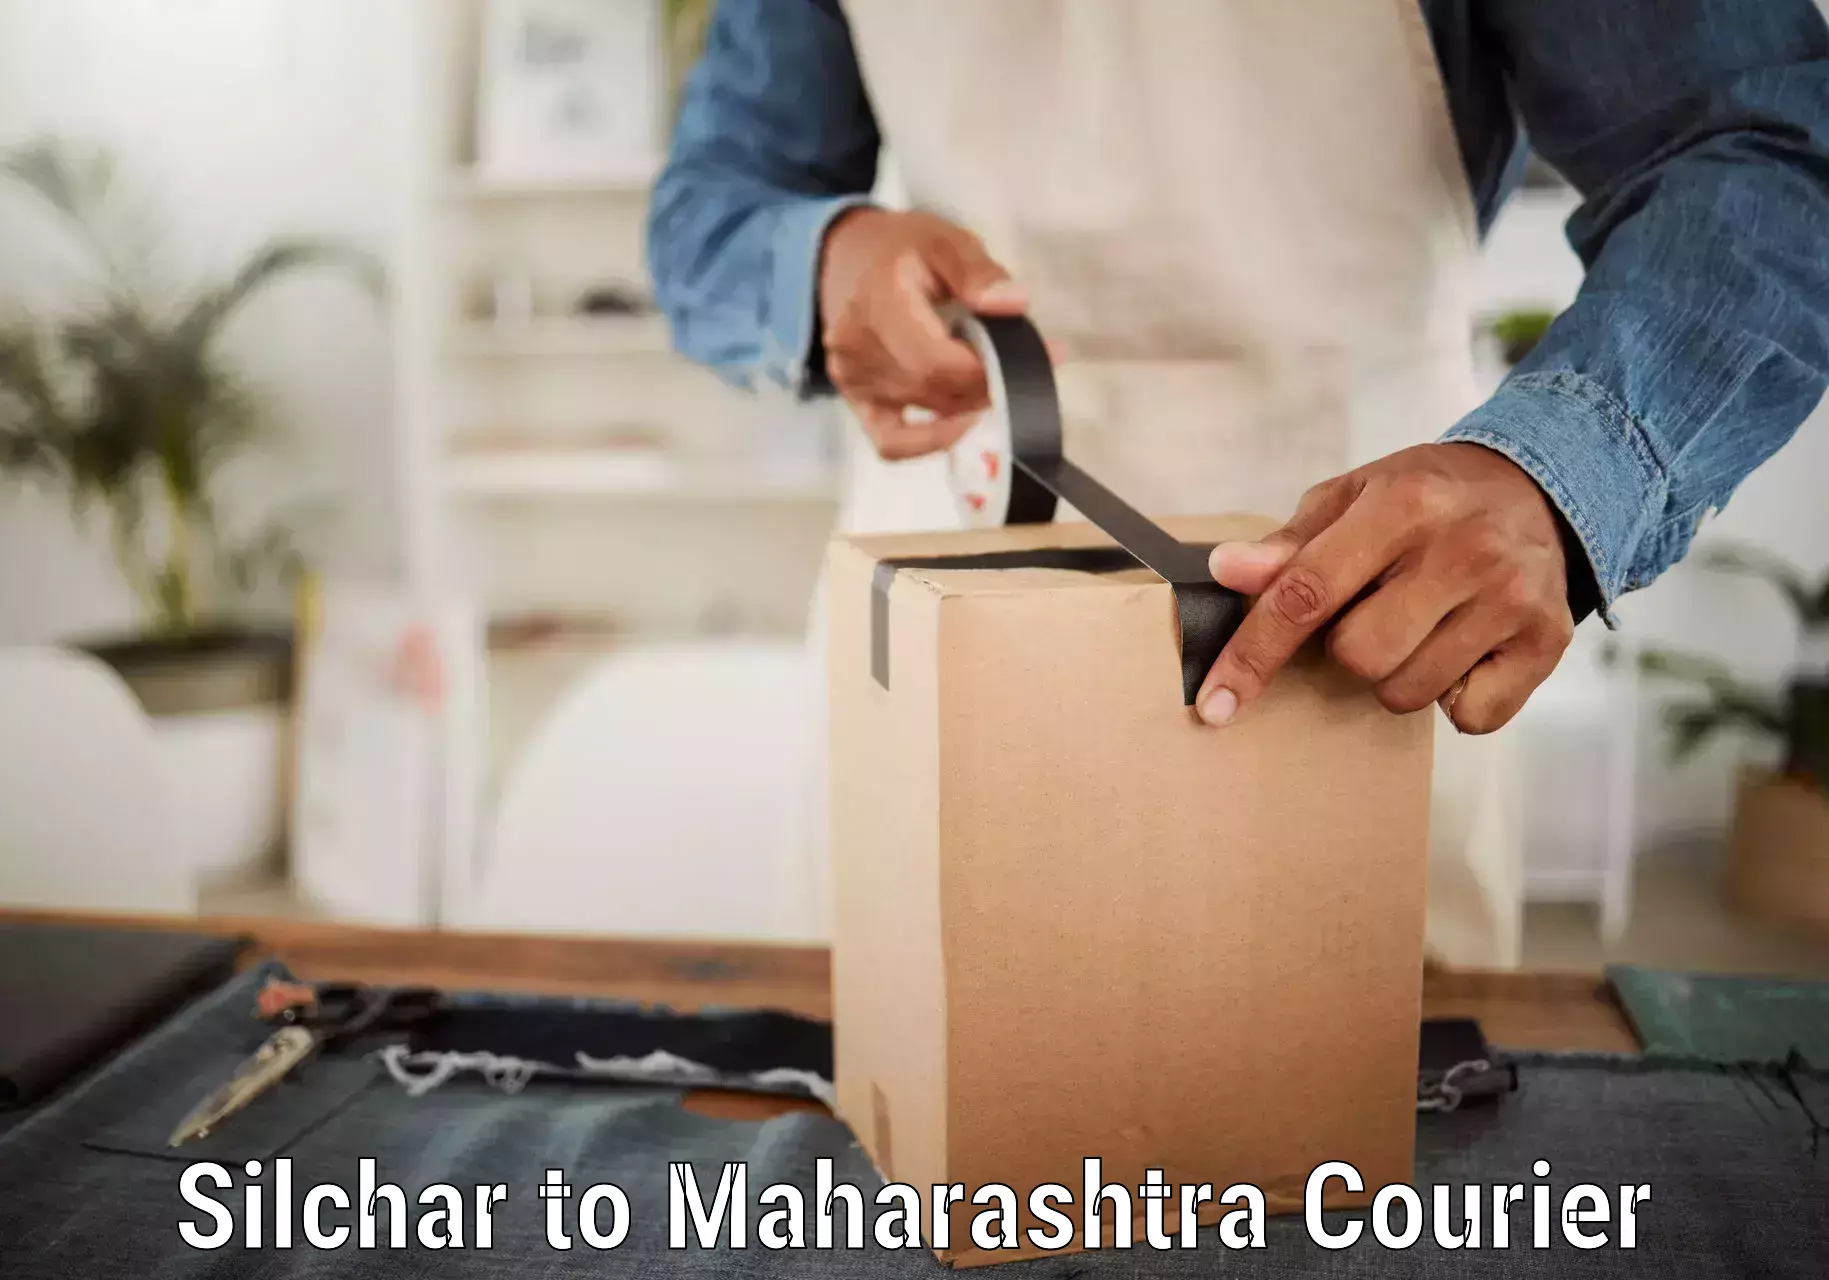 On-call courier service Silchar to Mahabaleshwar